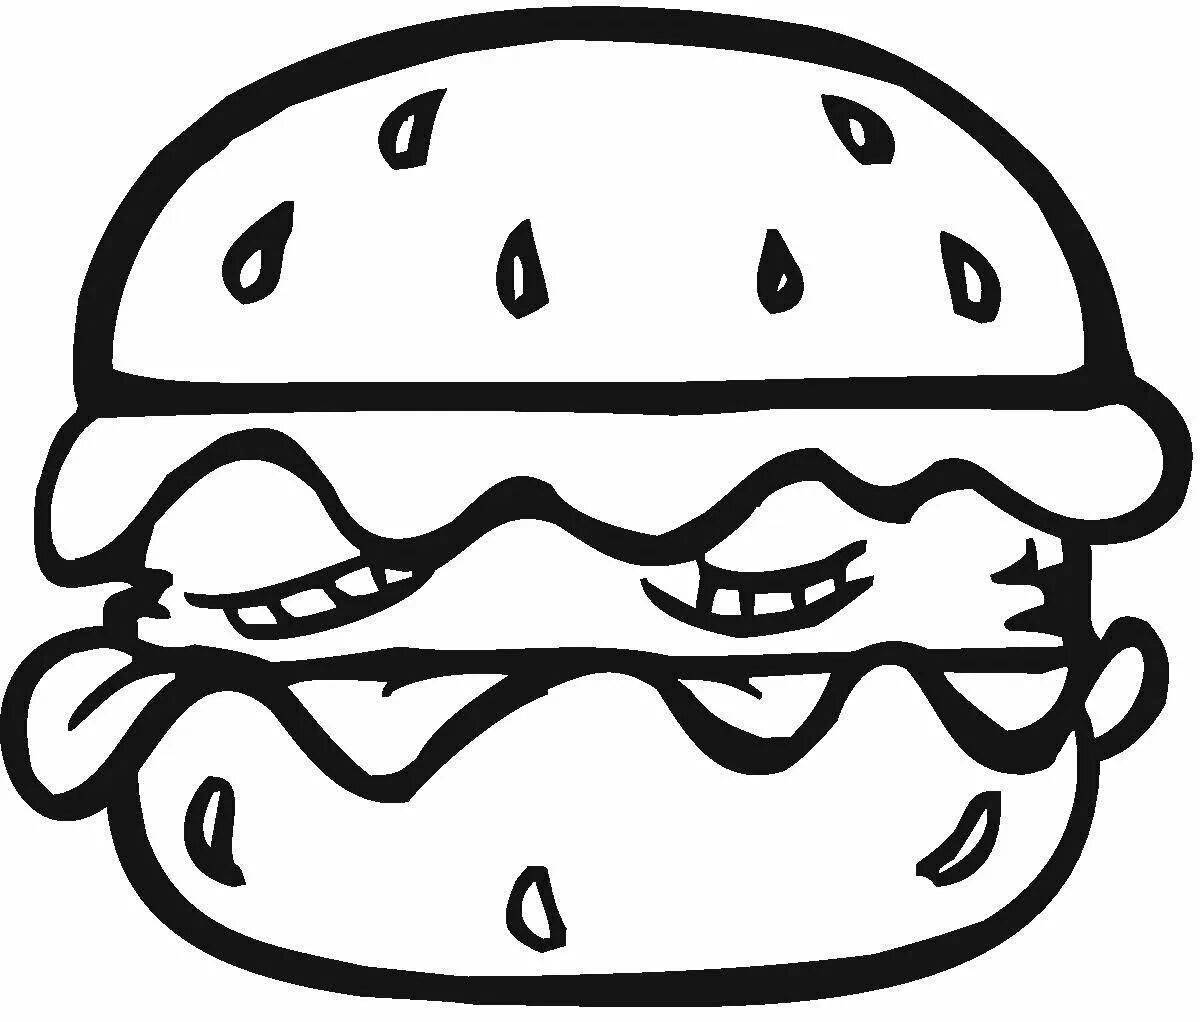 Coloring page happy hamburger for kids